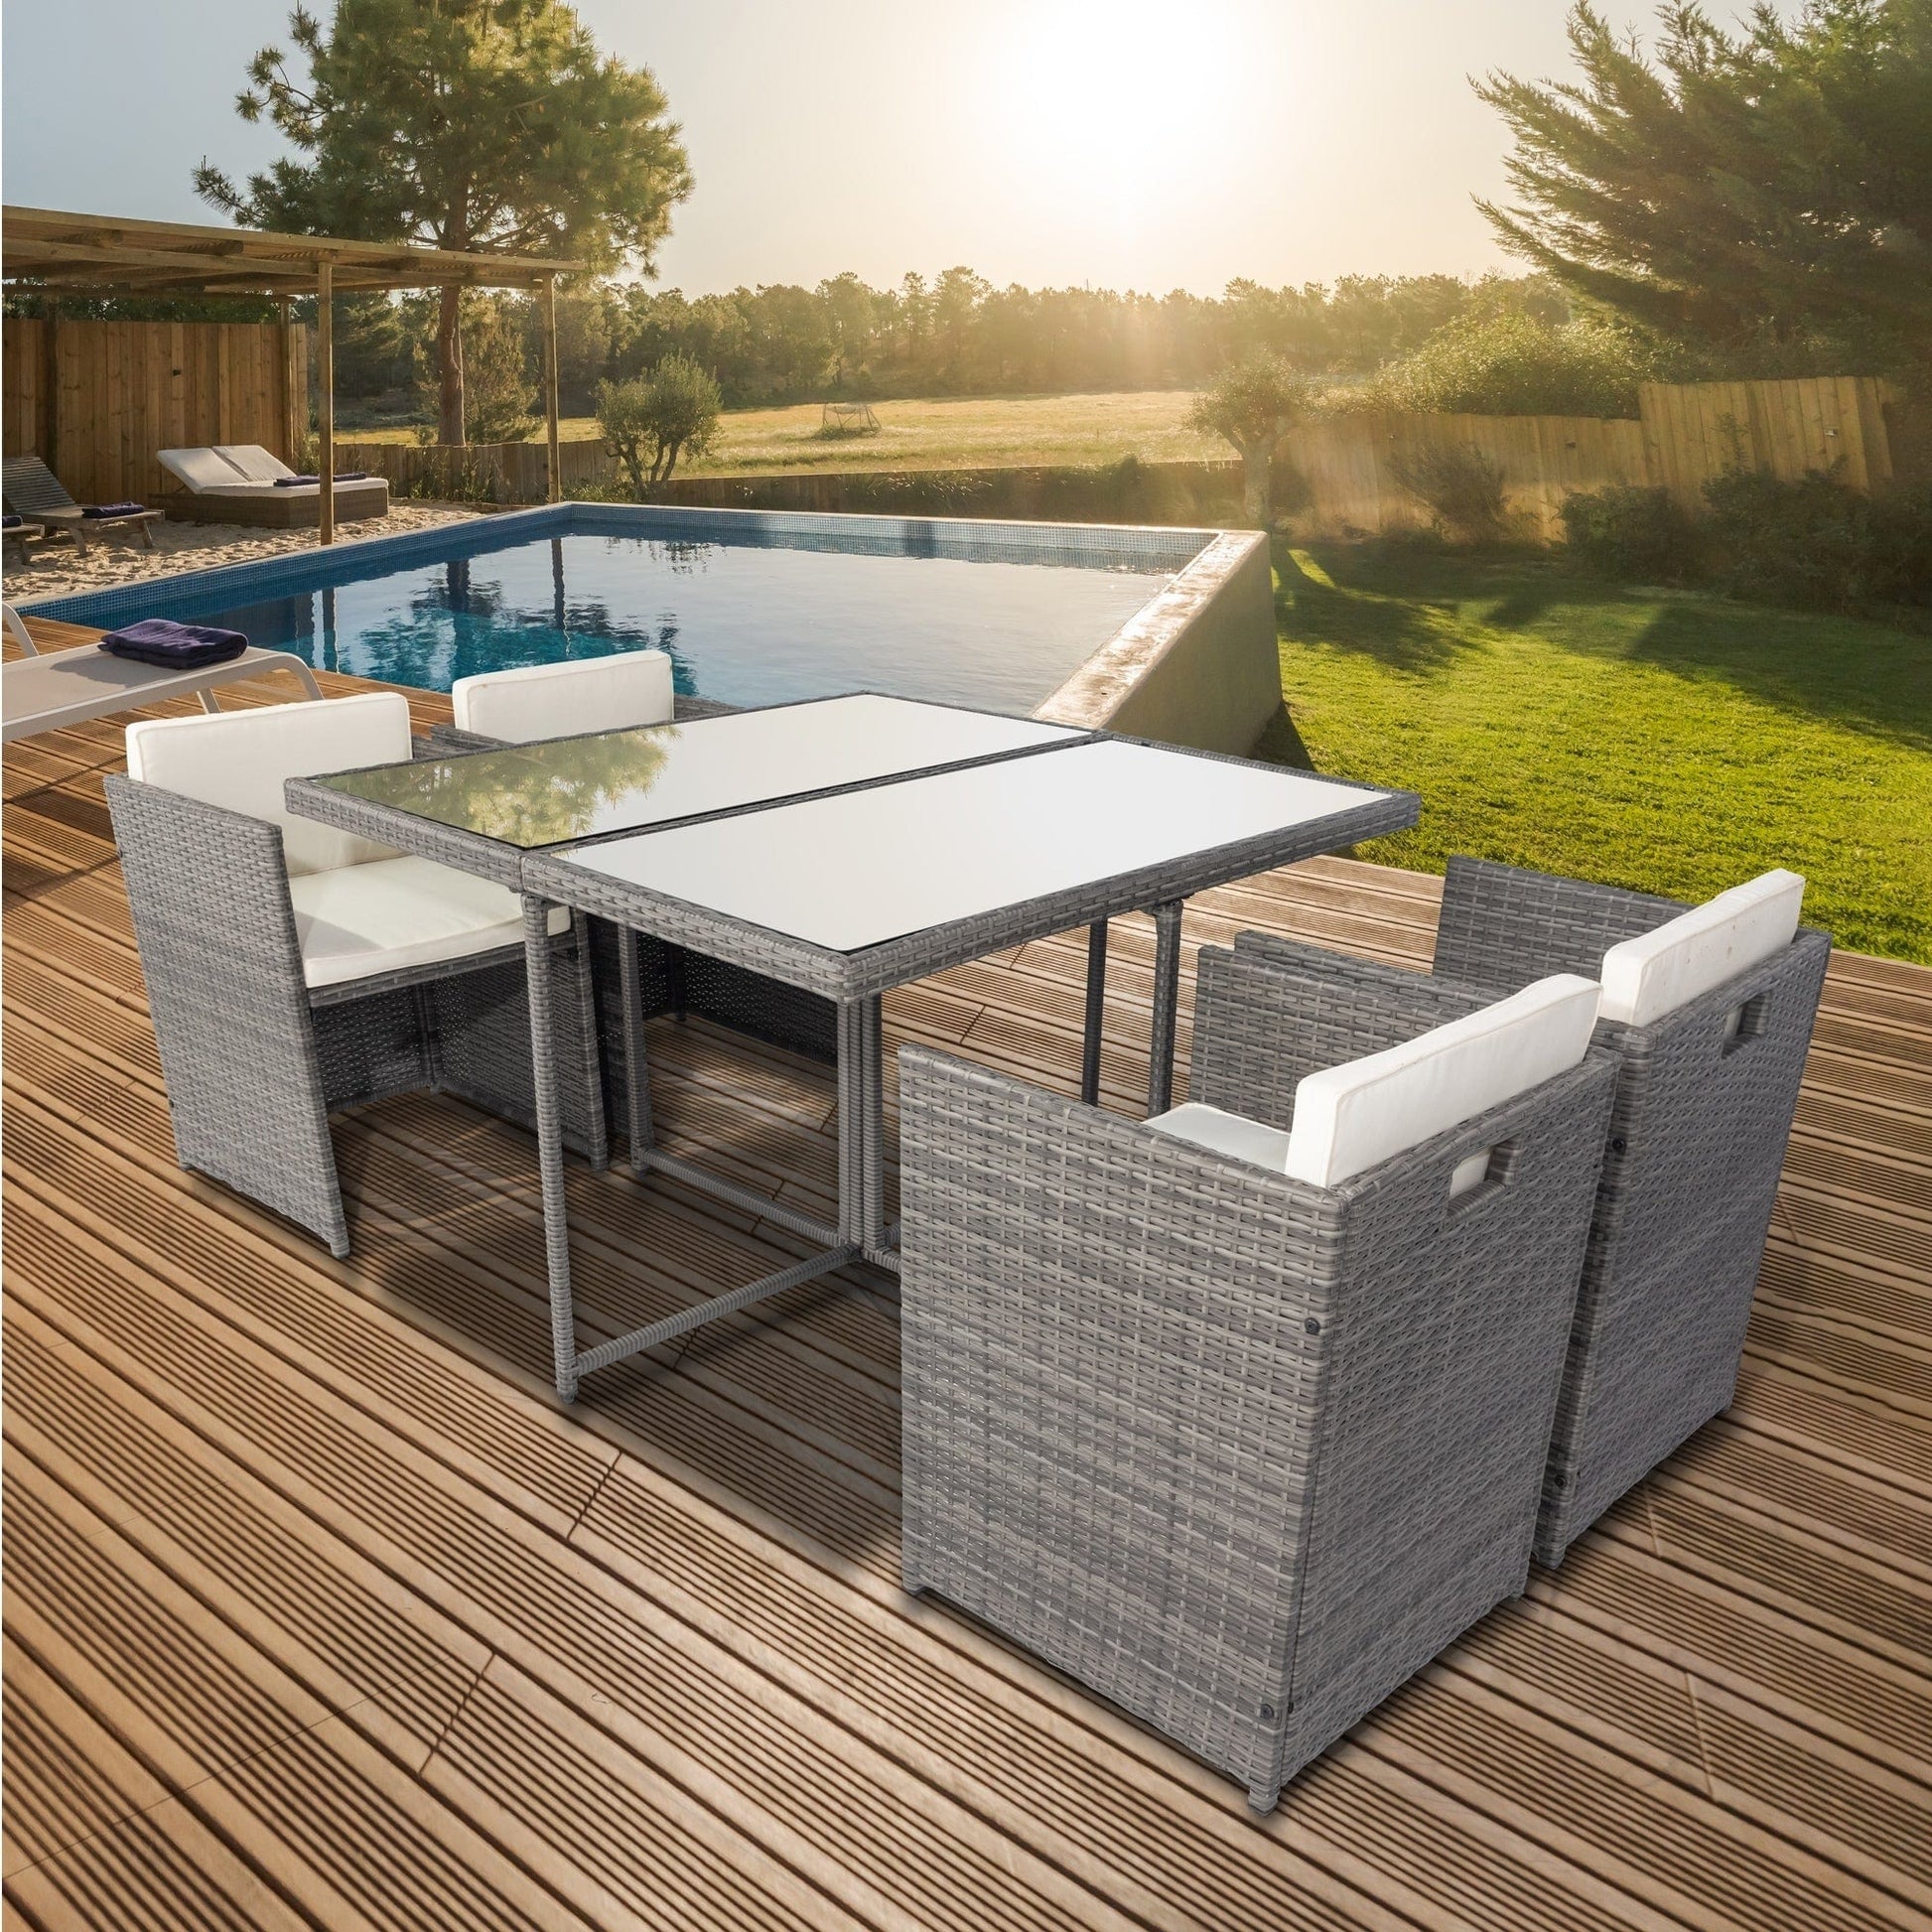 1st Choice Furniture Direct Patio Dining Set 1st Choice 5-Piece Patio Dining Set with Rattan Chairs and Glass Table